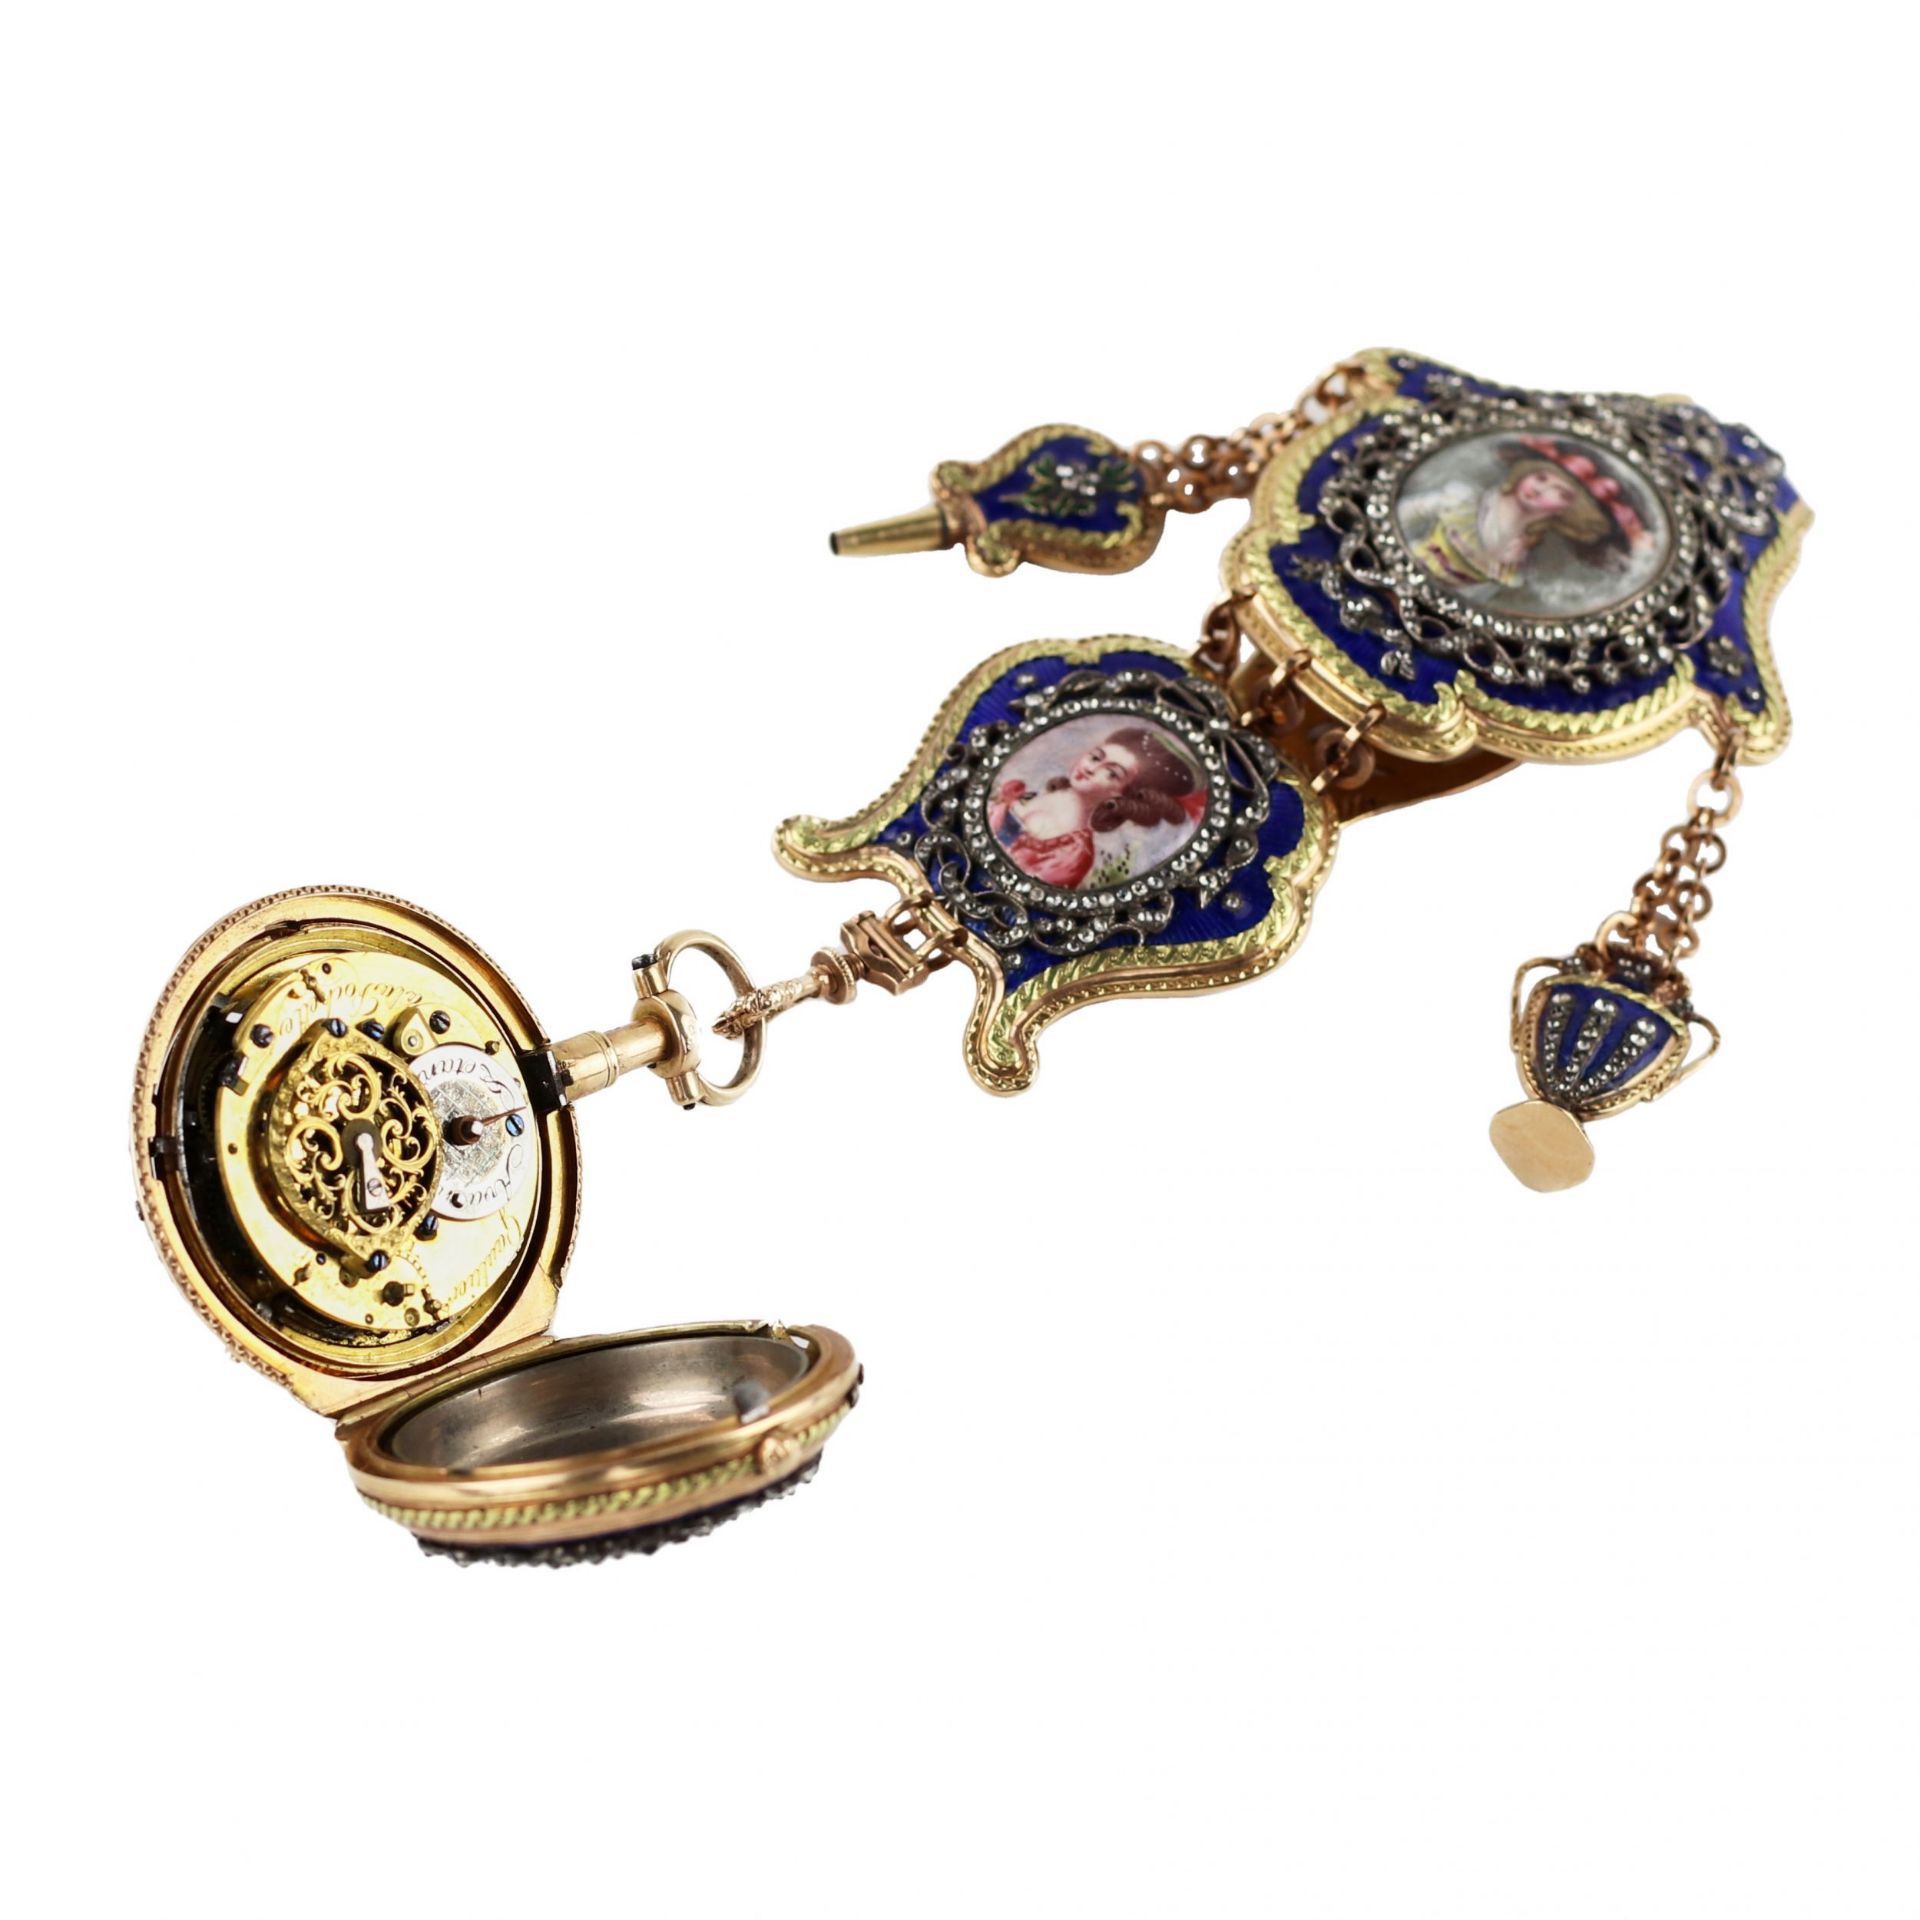 Chatelain with gold pocket watch, diamonds and enamel painting. France 19th century. - Bild 3 aus 10